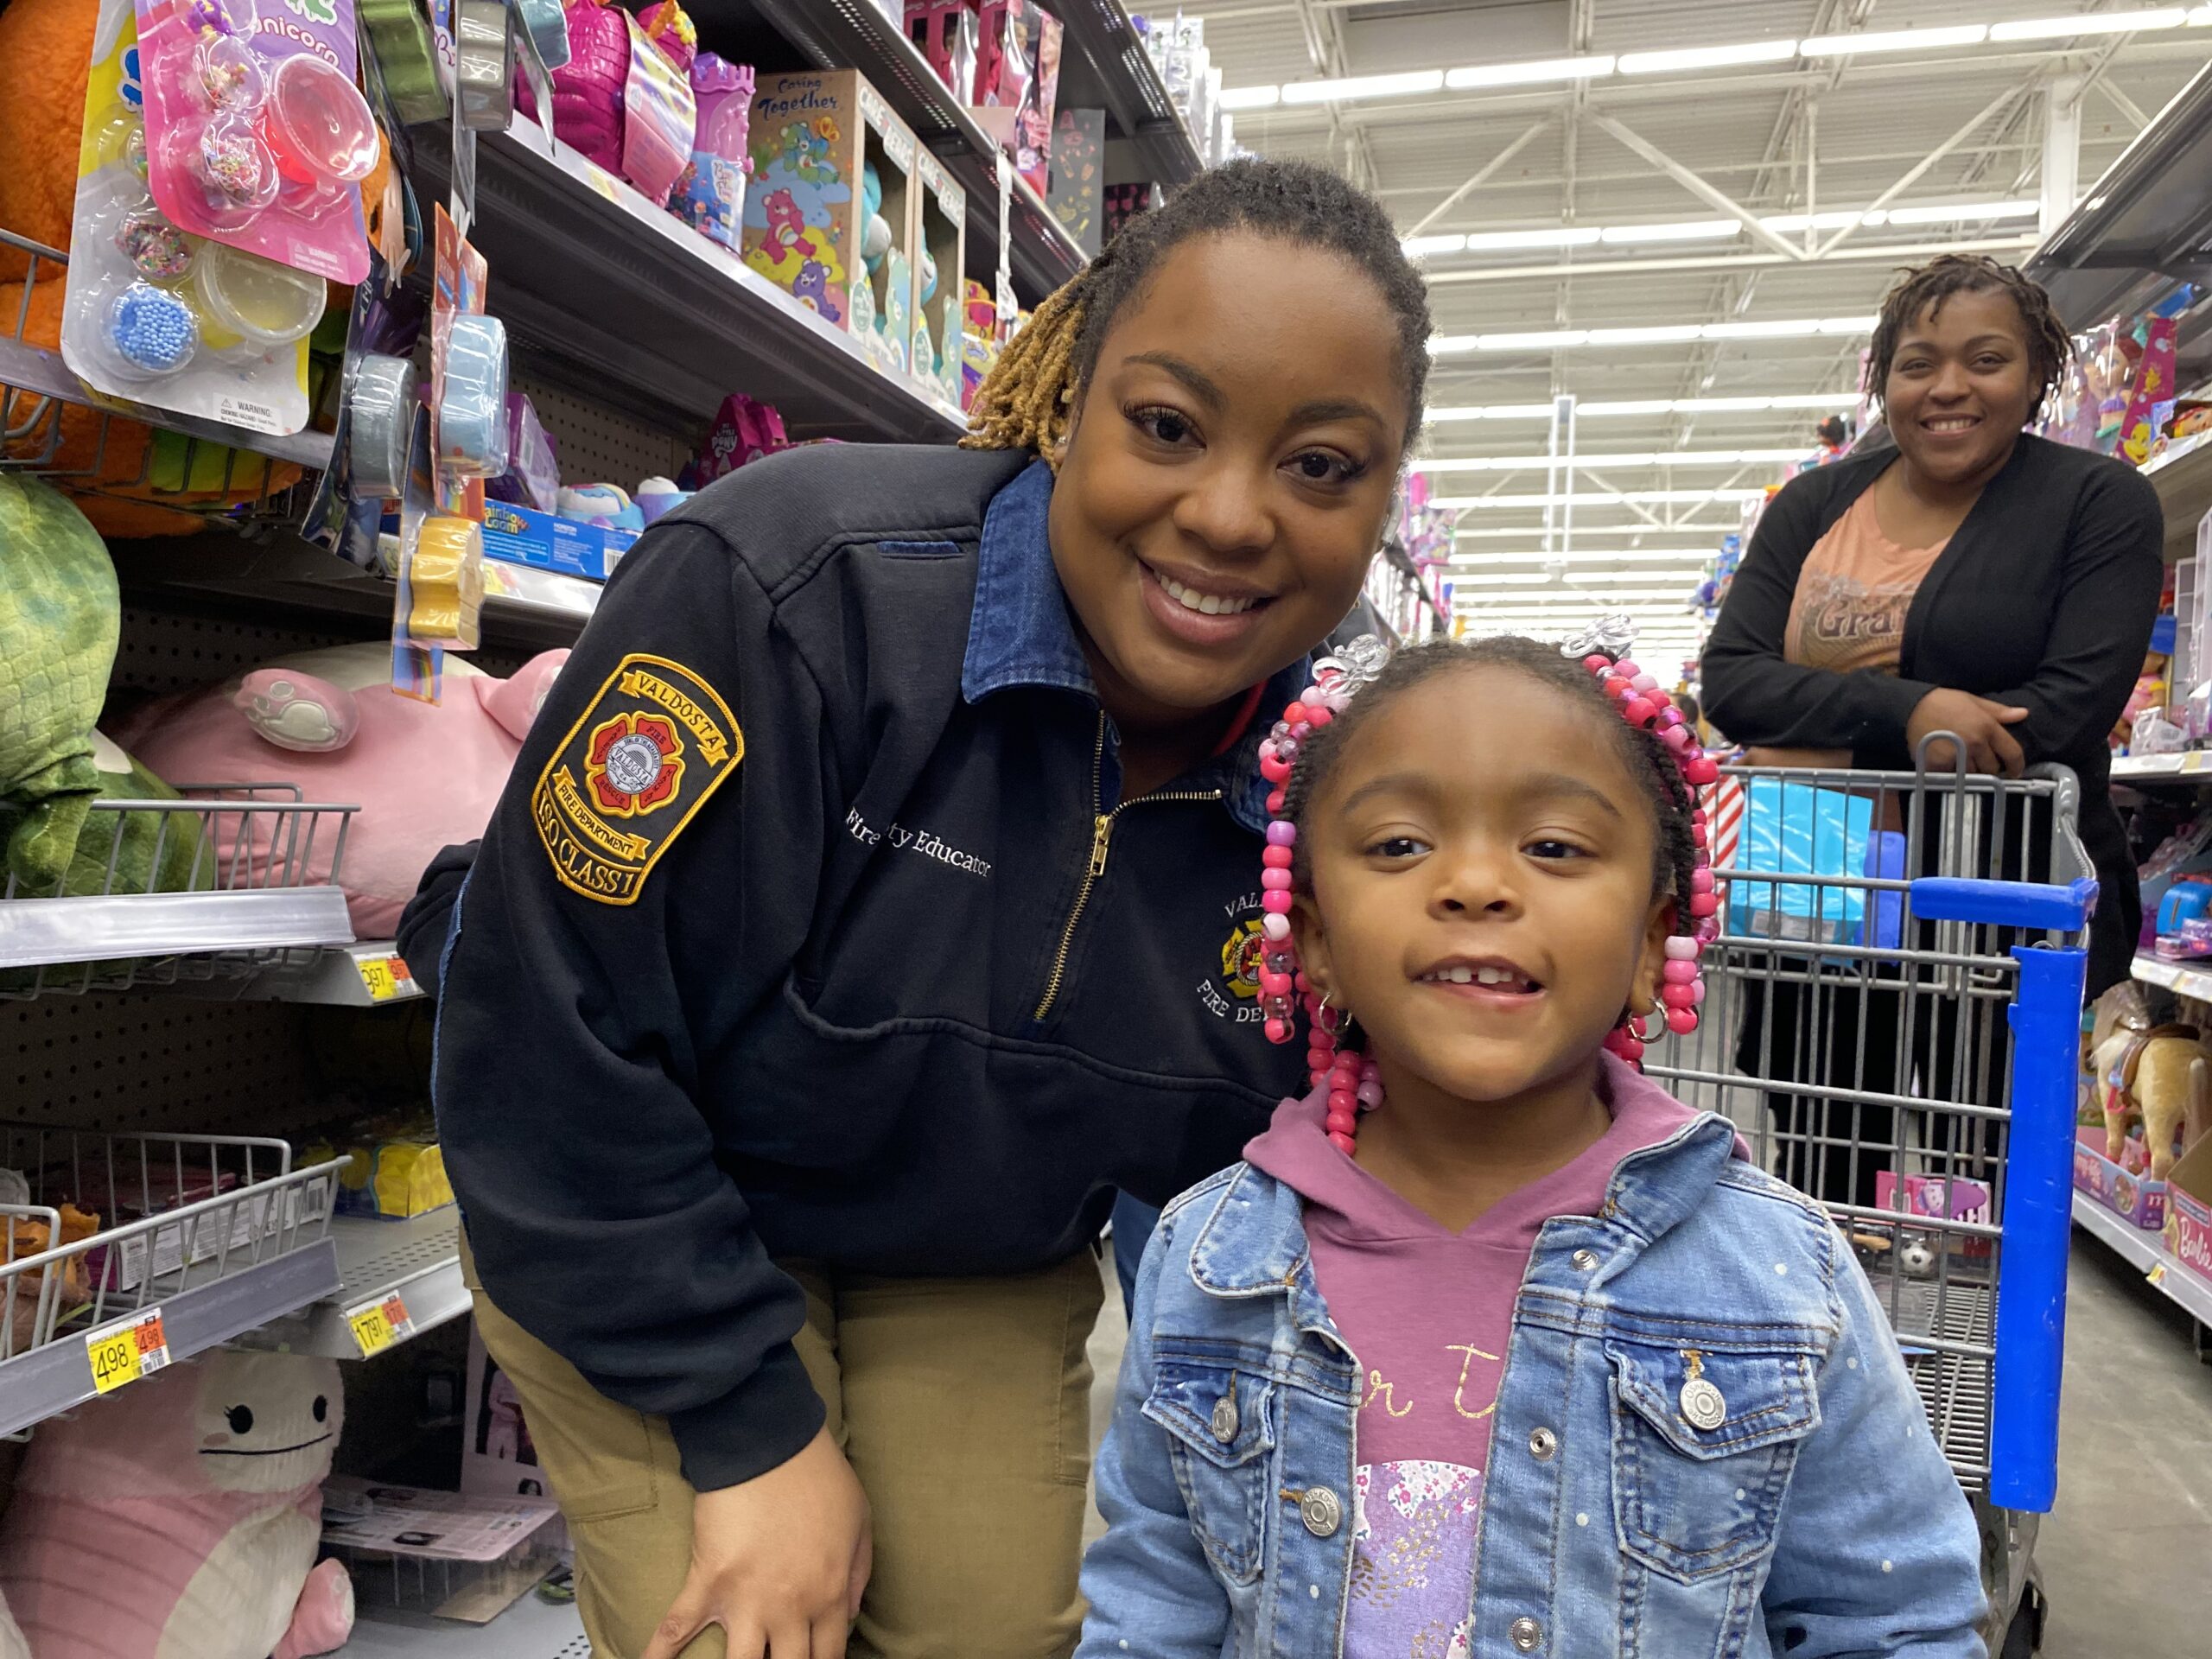 Valdosta Firefighters To Host 'Shop With a Firefighter' Event for Local Youth